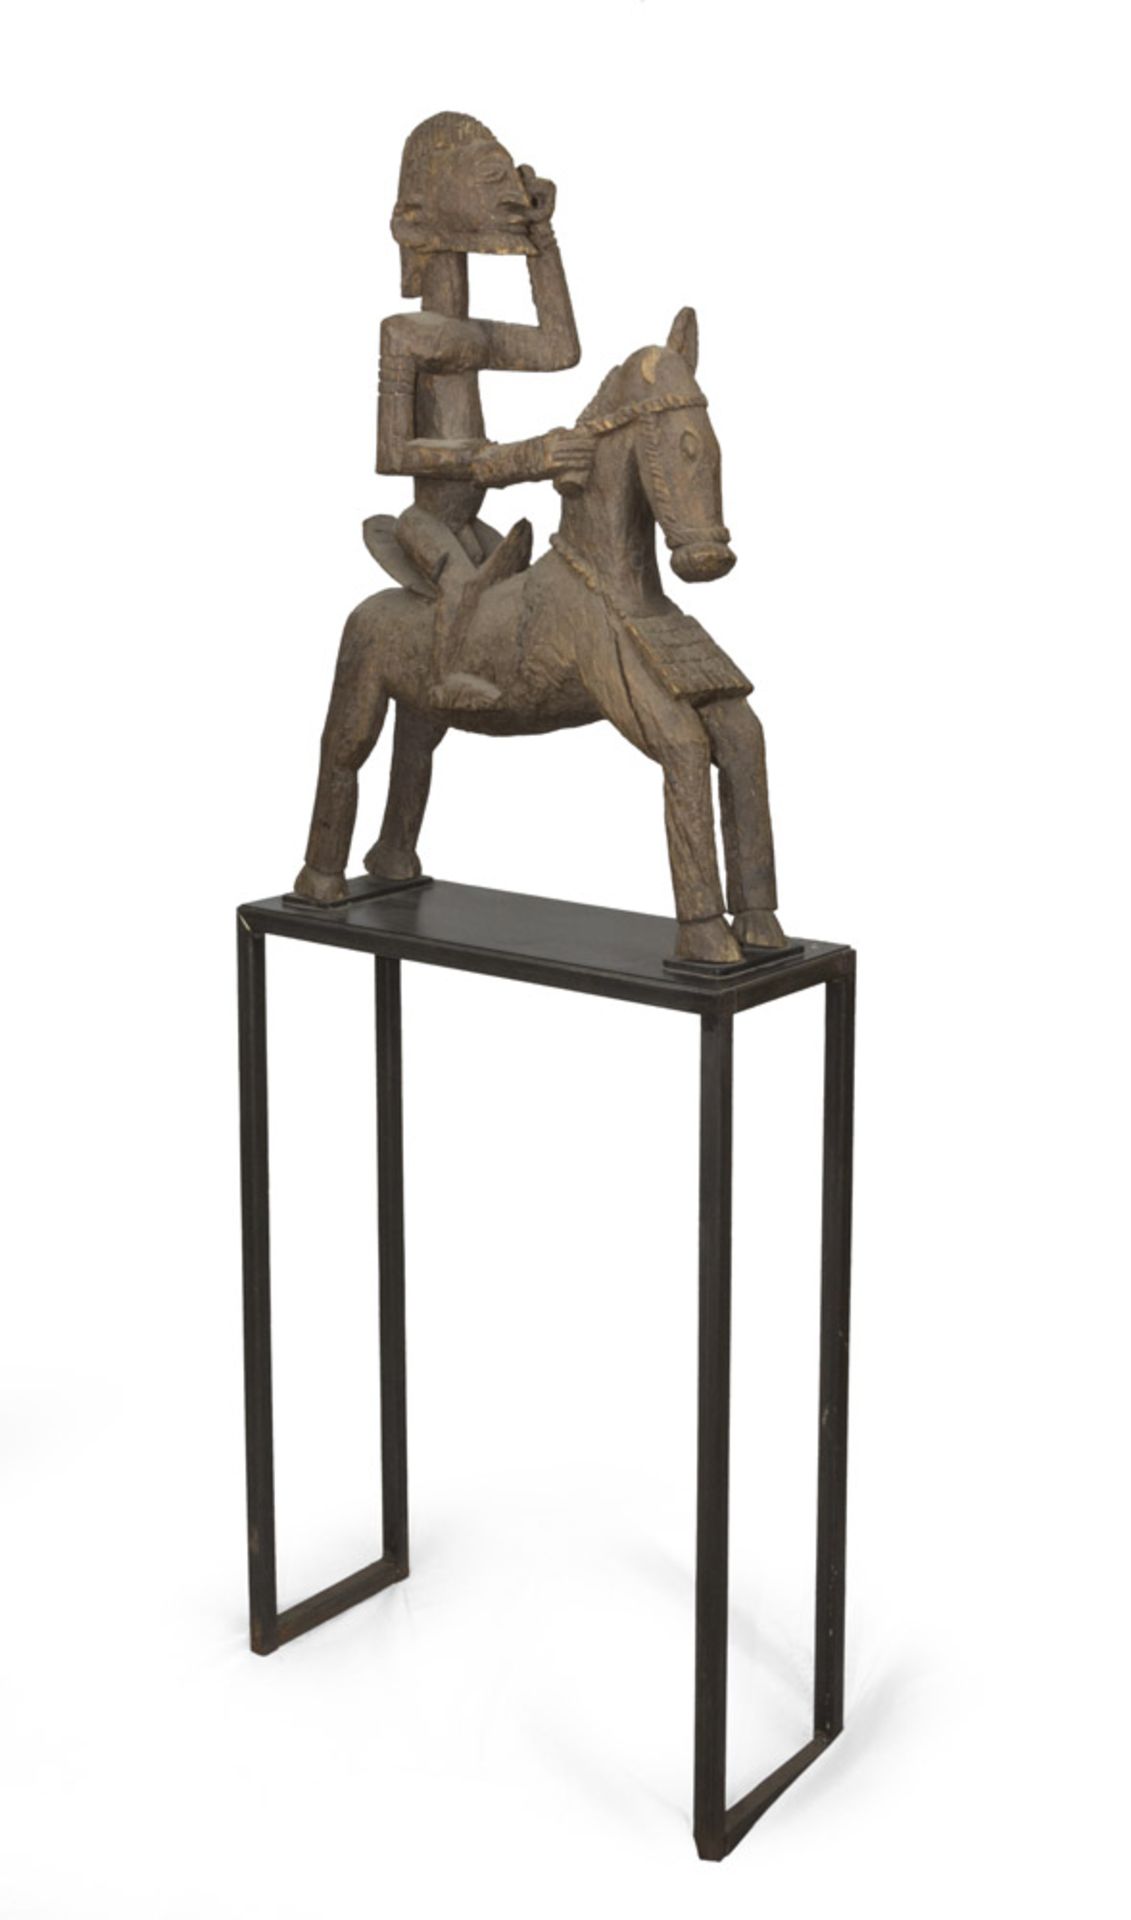 WOODEN RIDER'S SCULPTURE, DOGON, MALI EARLY 20TH CENTURY